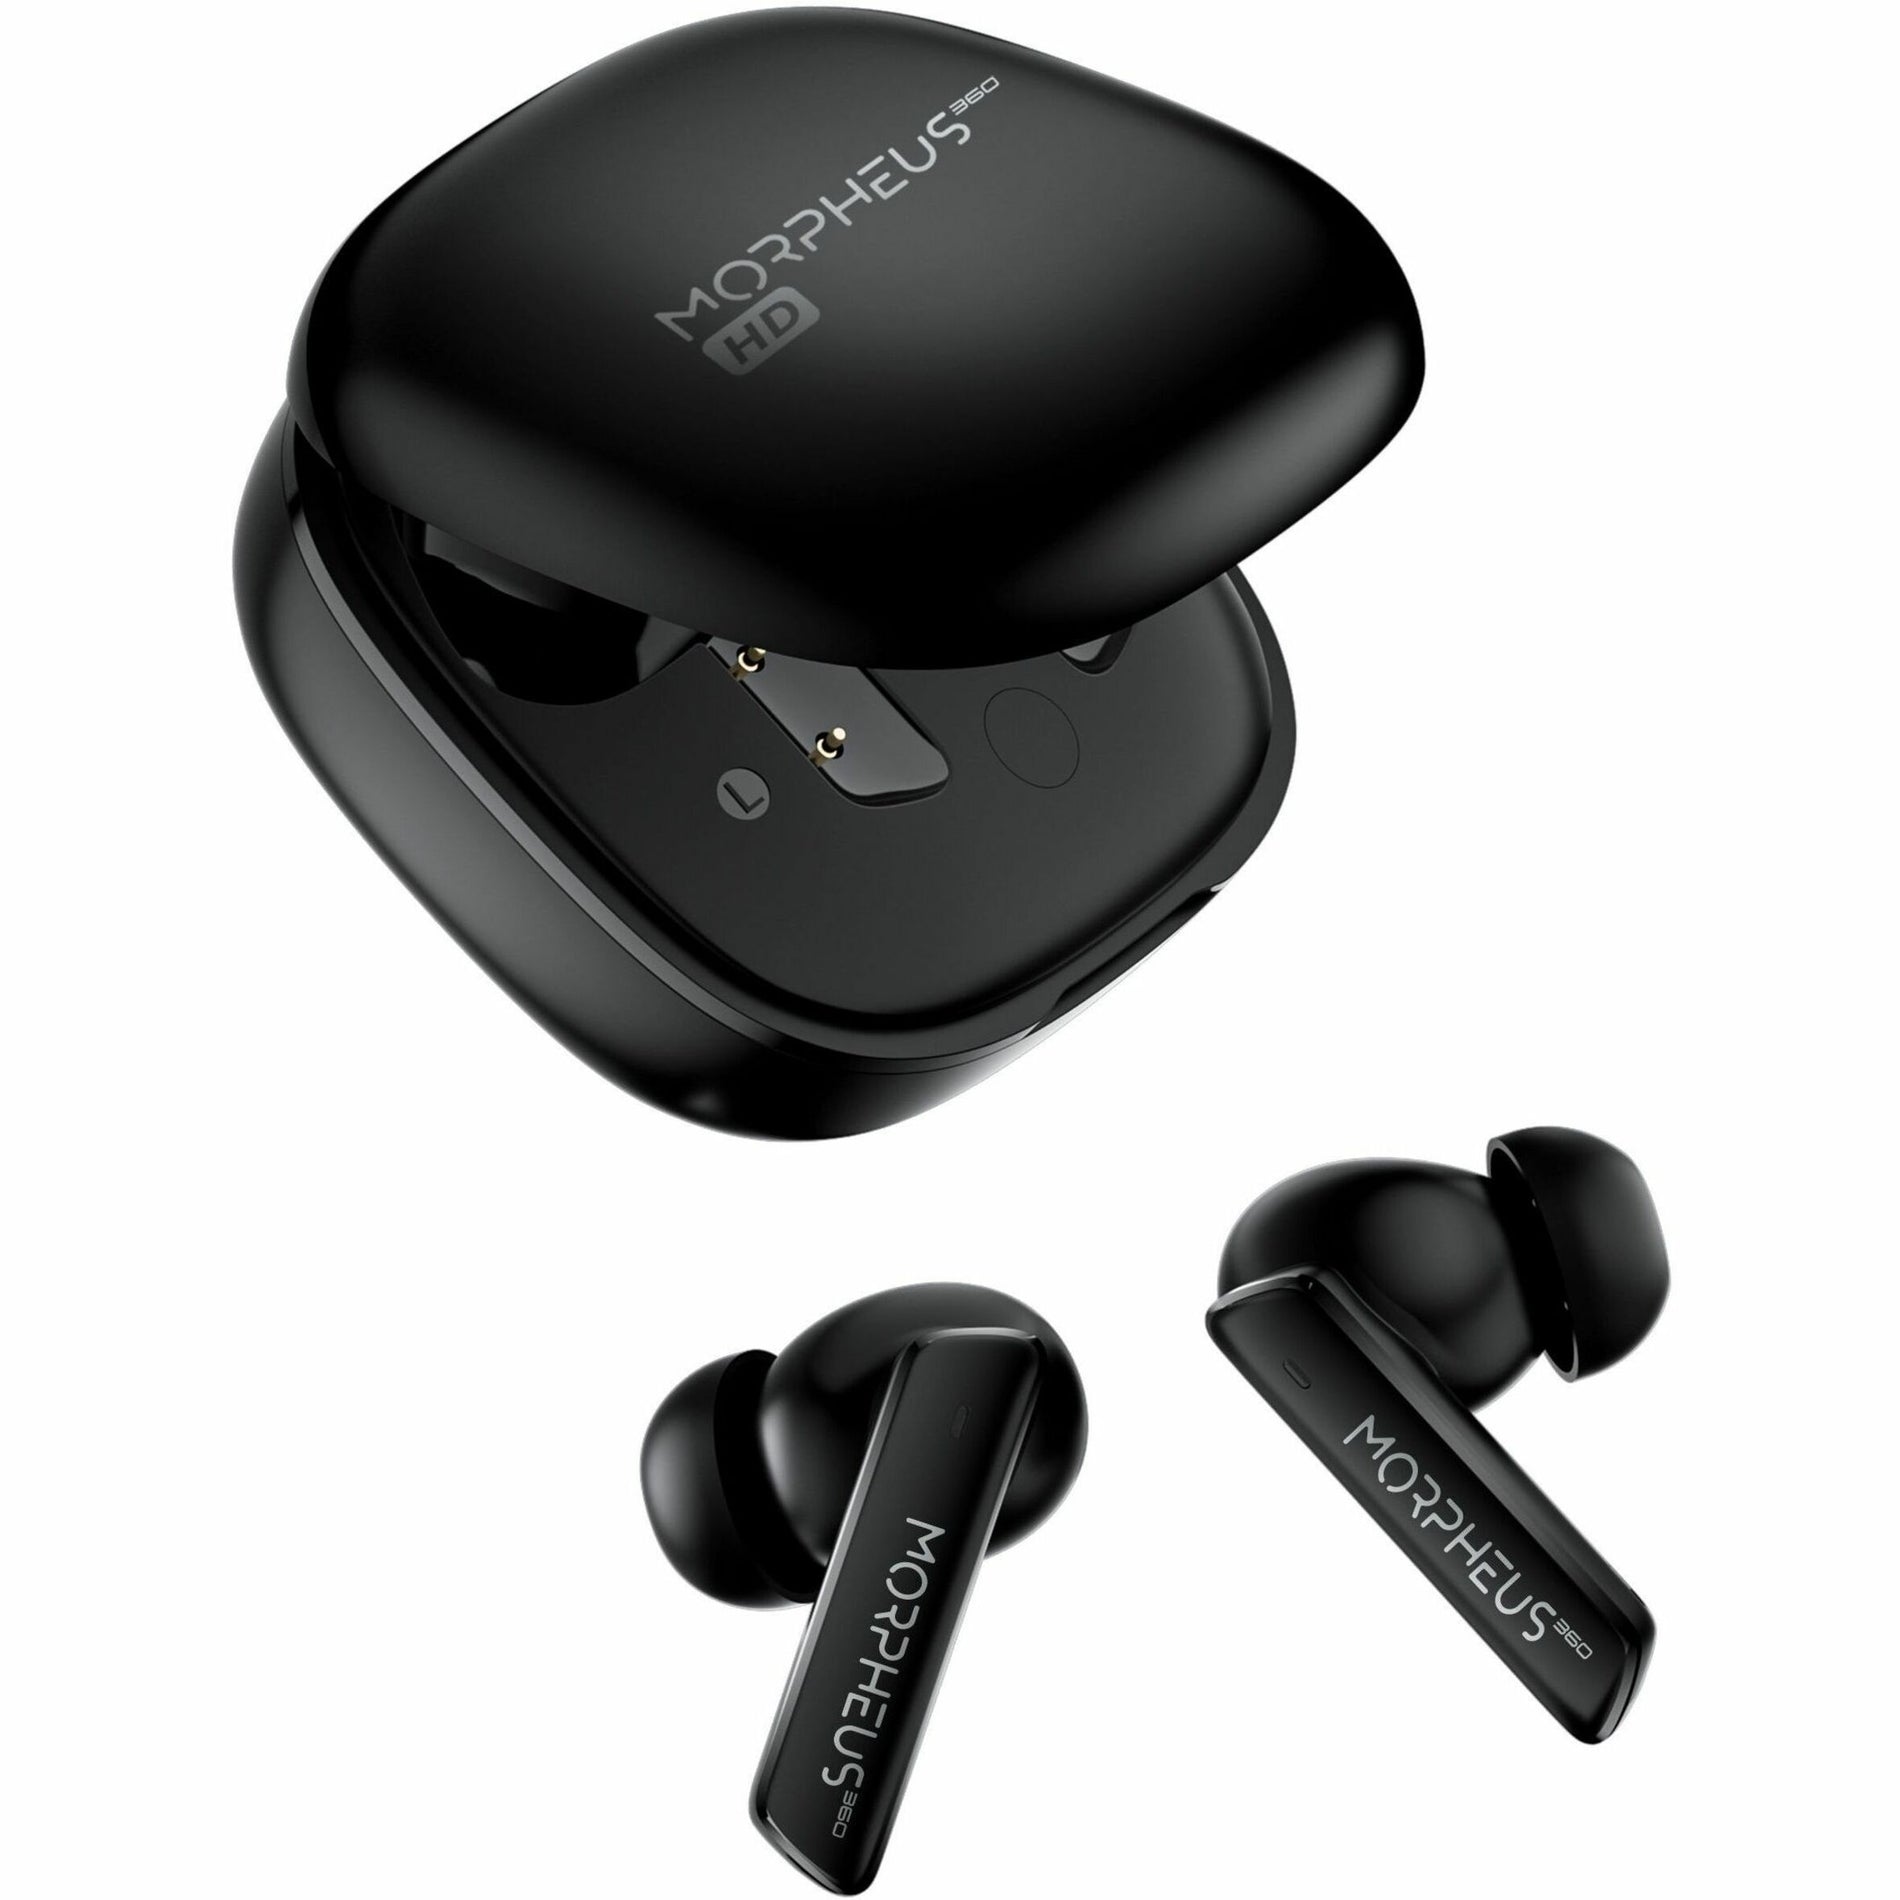 Morpheus 360 TW7850HD Pulse ANC Hybrid Noise Canceling True Wireless Earbuds, Wind Reduction, Touch Control